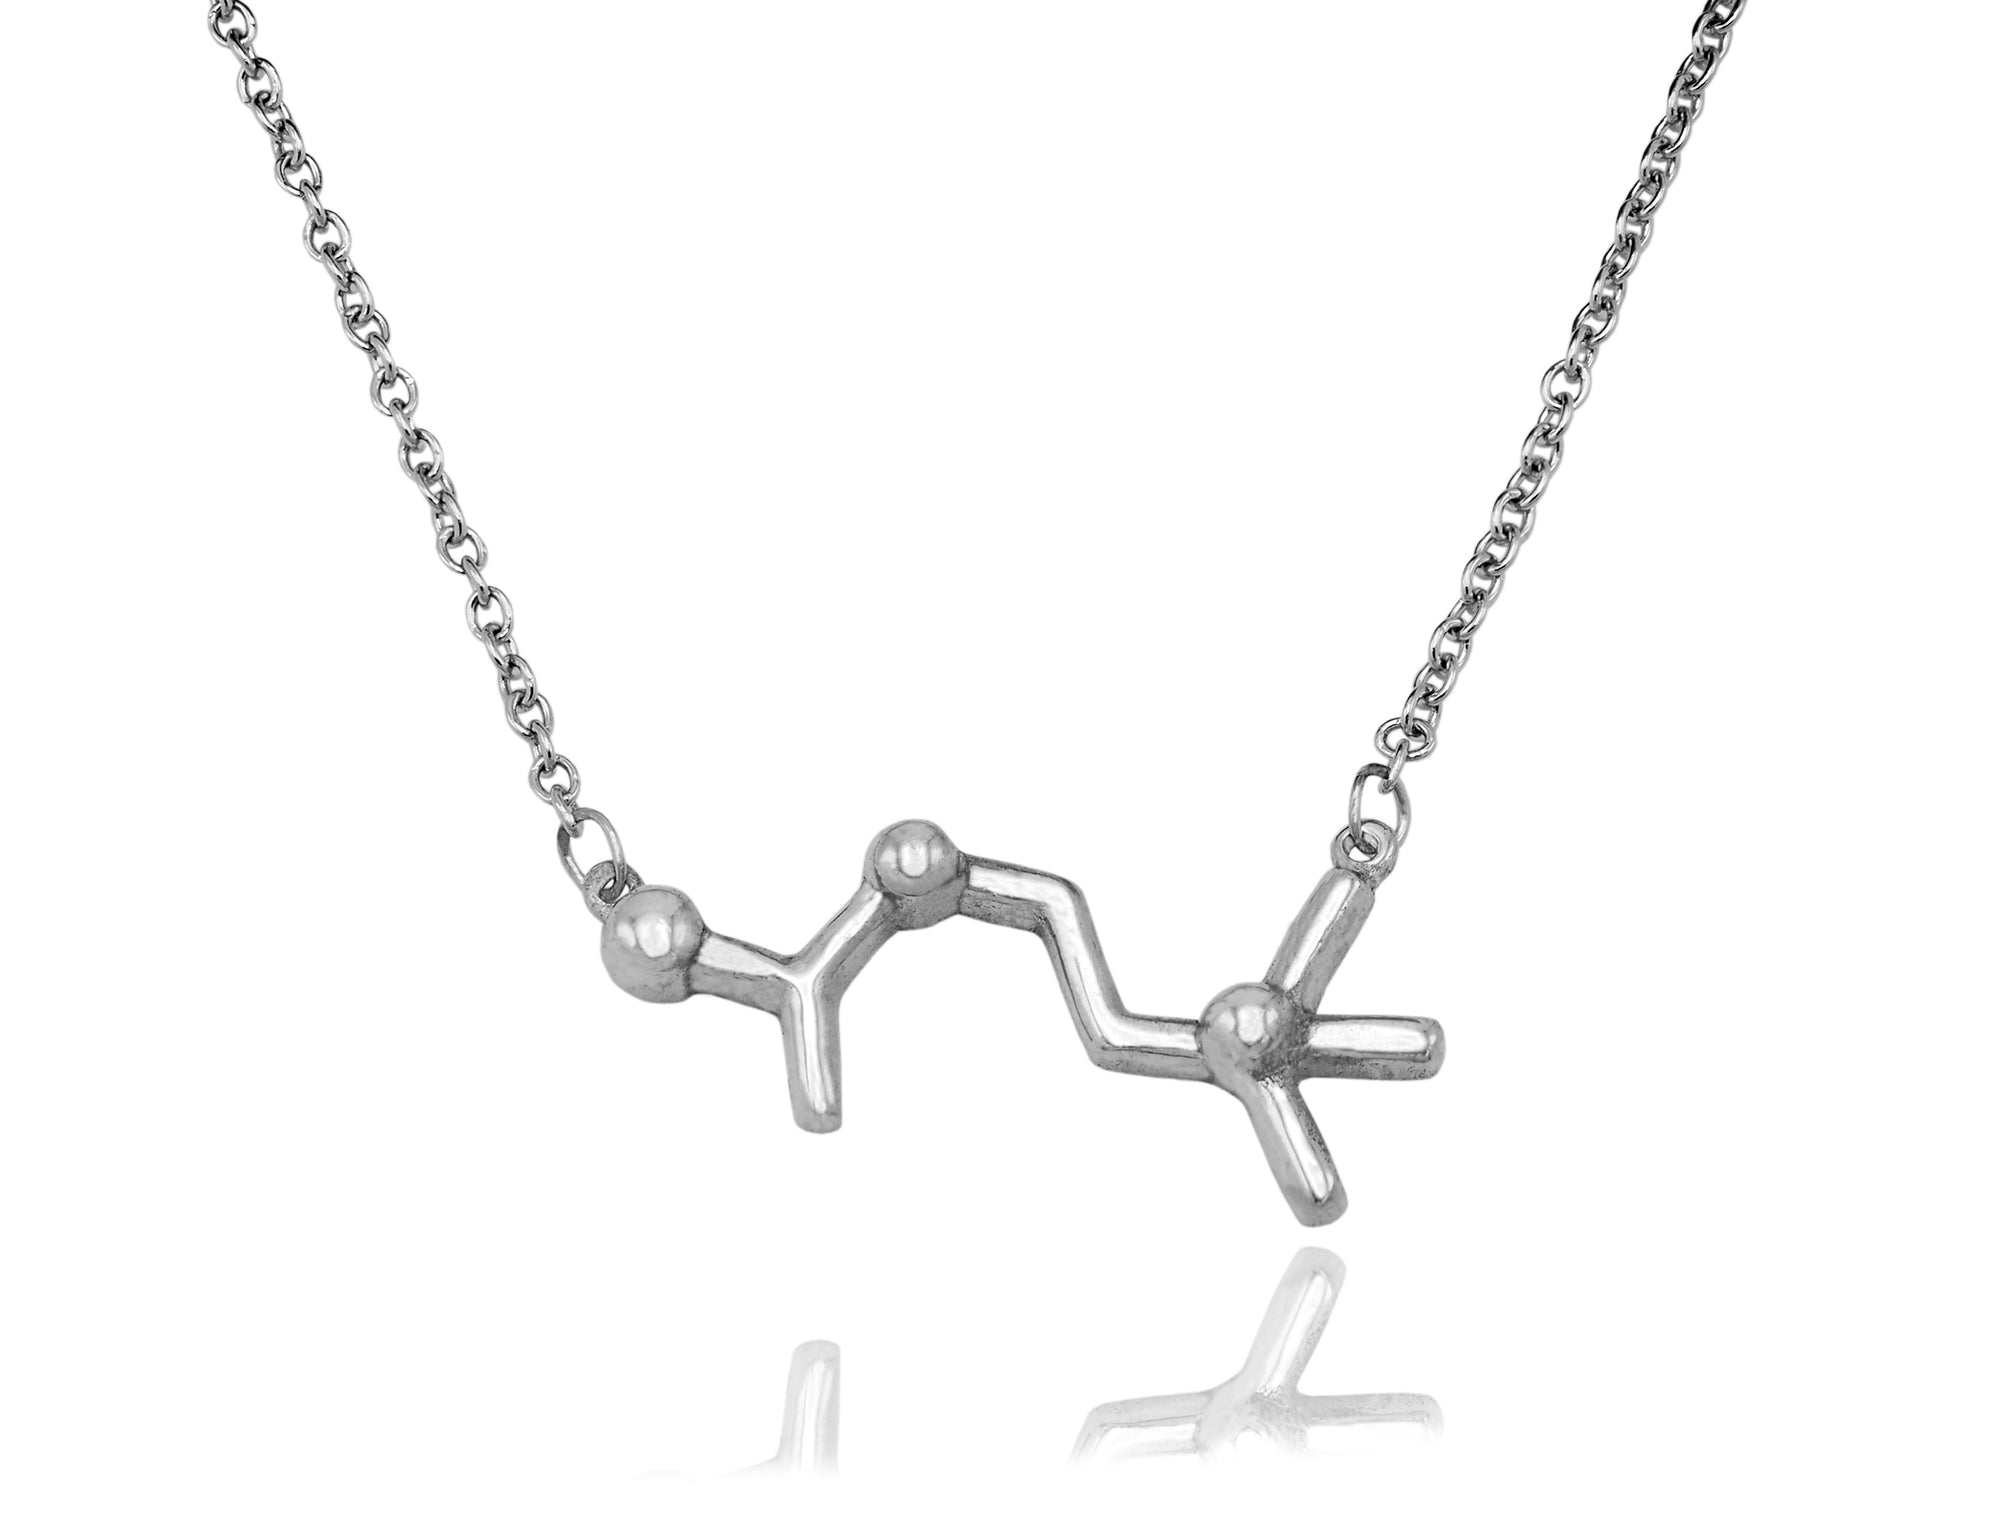 Serotonin Molecule Necklace with Butterfly, Science Jewelry, Molecule  Necklace, Science Necklace, Doctors Necklace, Gift for Mom/Her/Best Friend  - GetNameNecklace